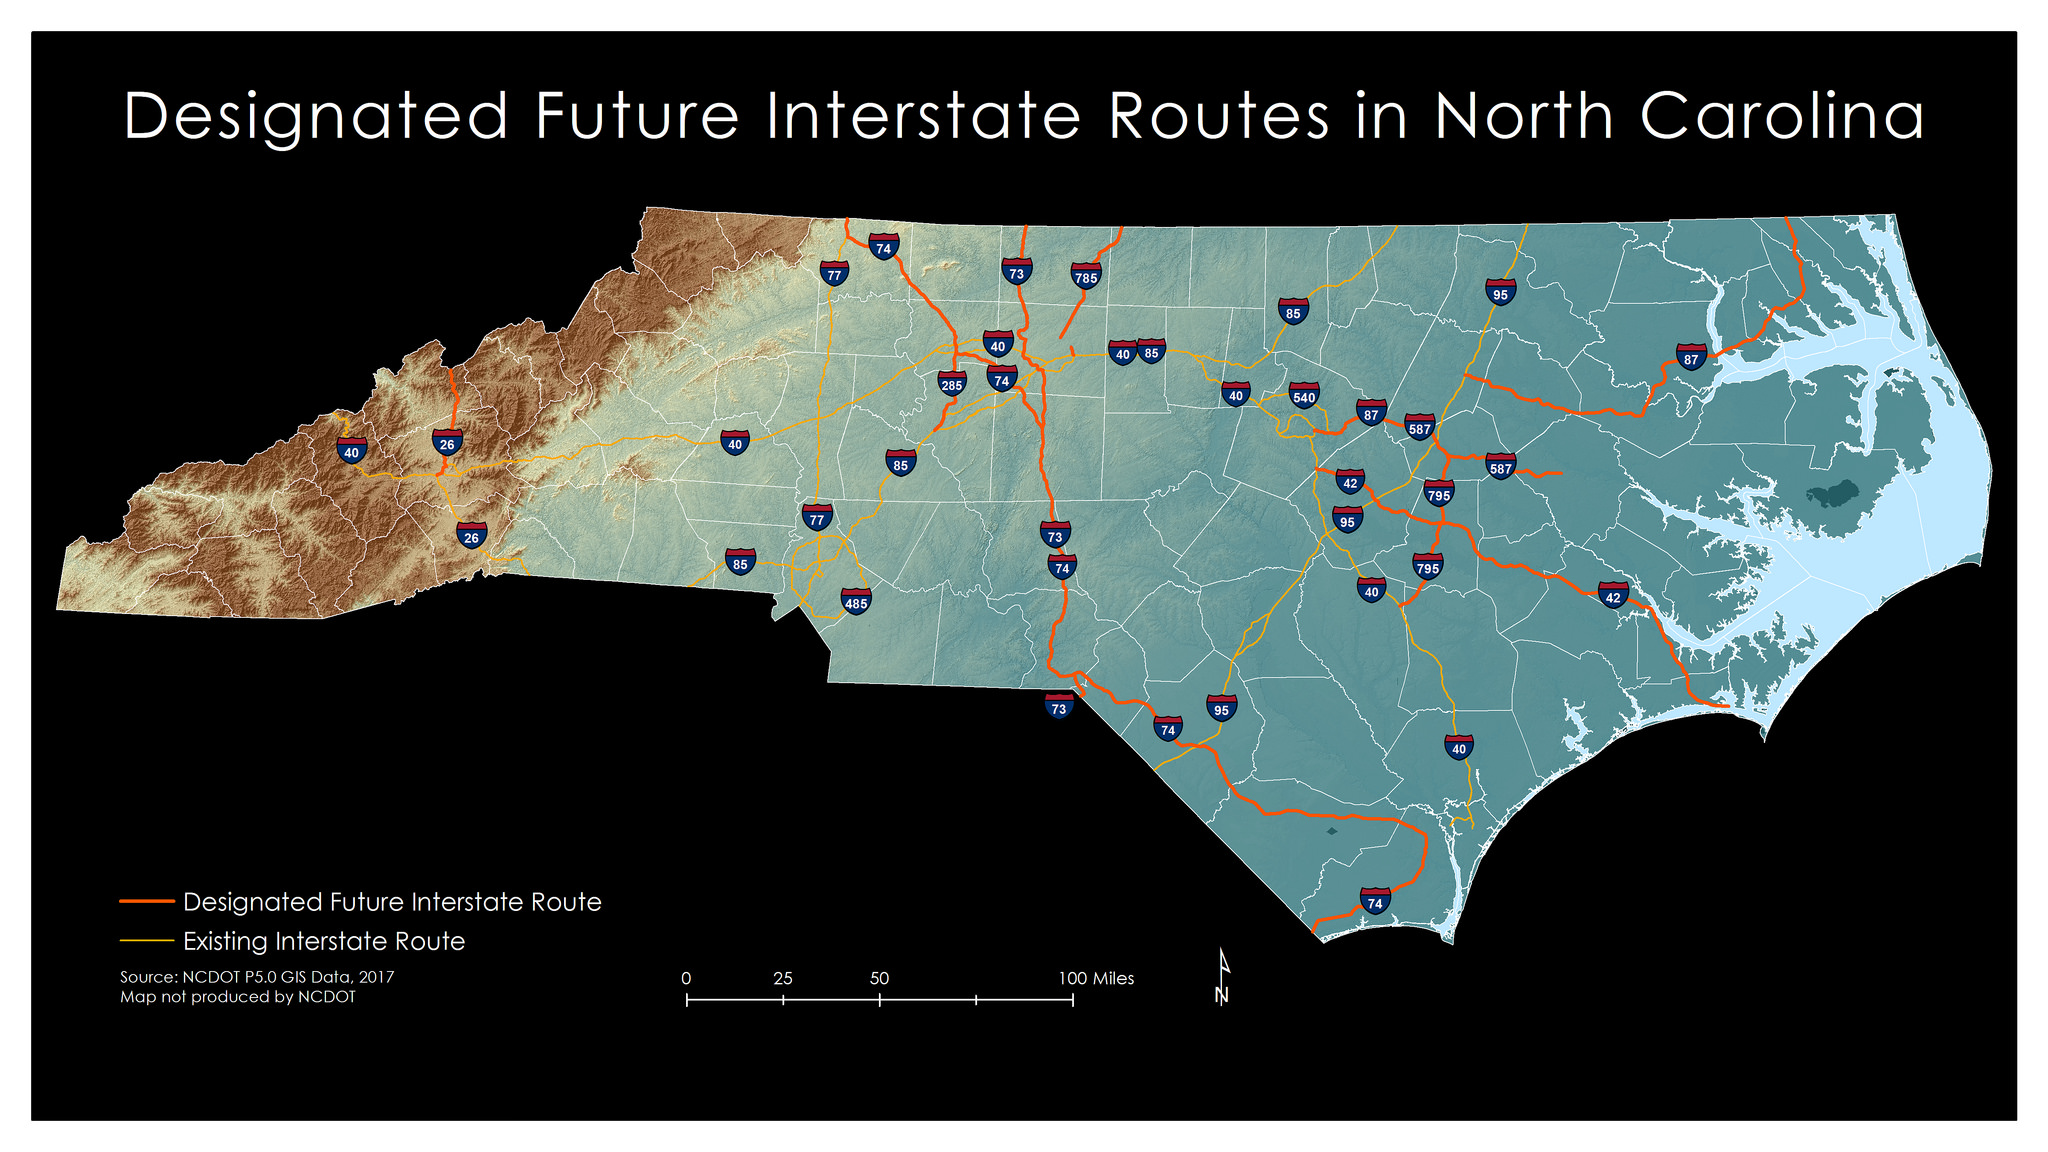 Image of NC Future Interstate routes as of Dec. 2017, by NCDOT